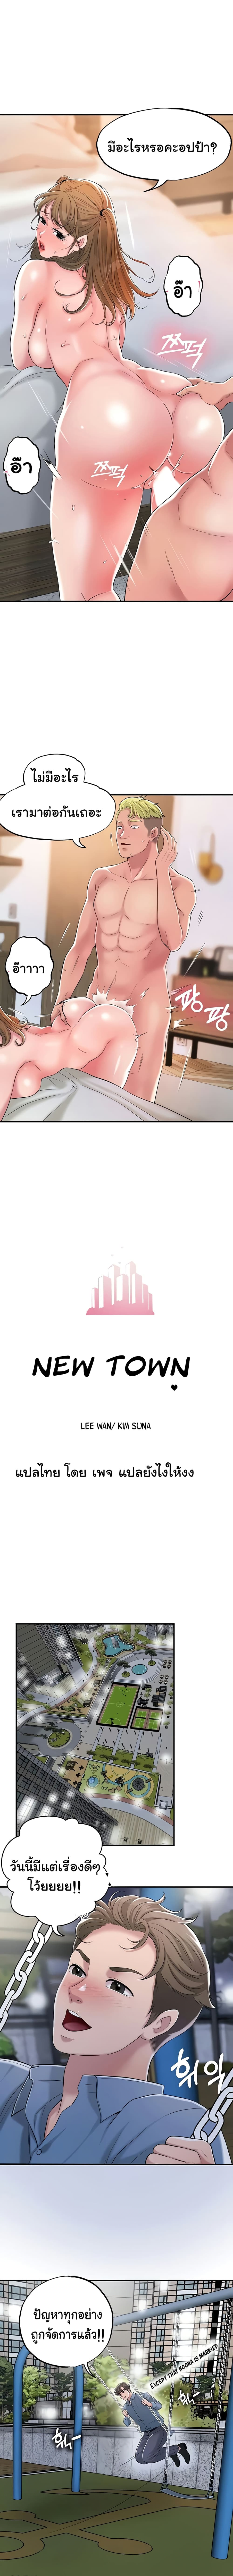 New Town 9 (9)